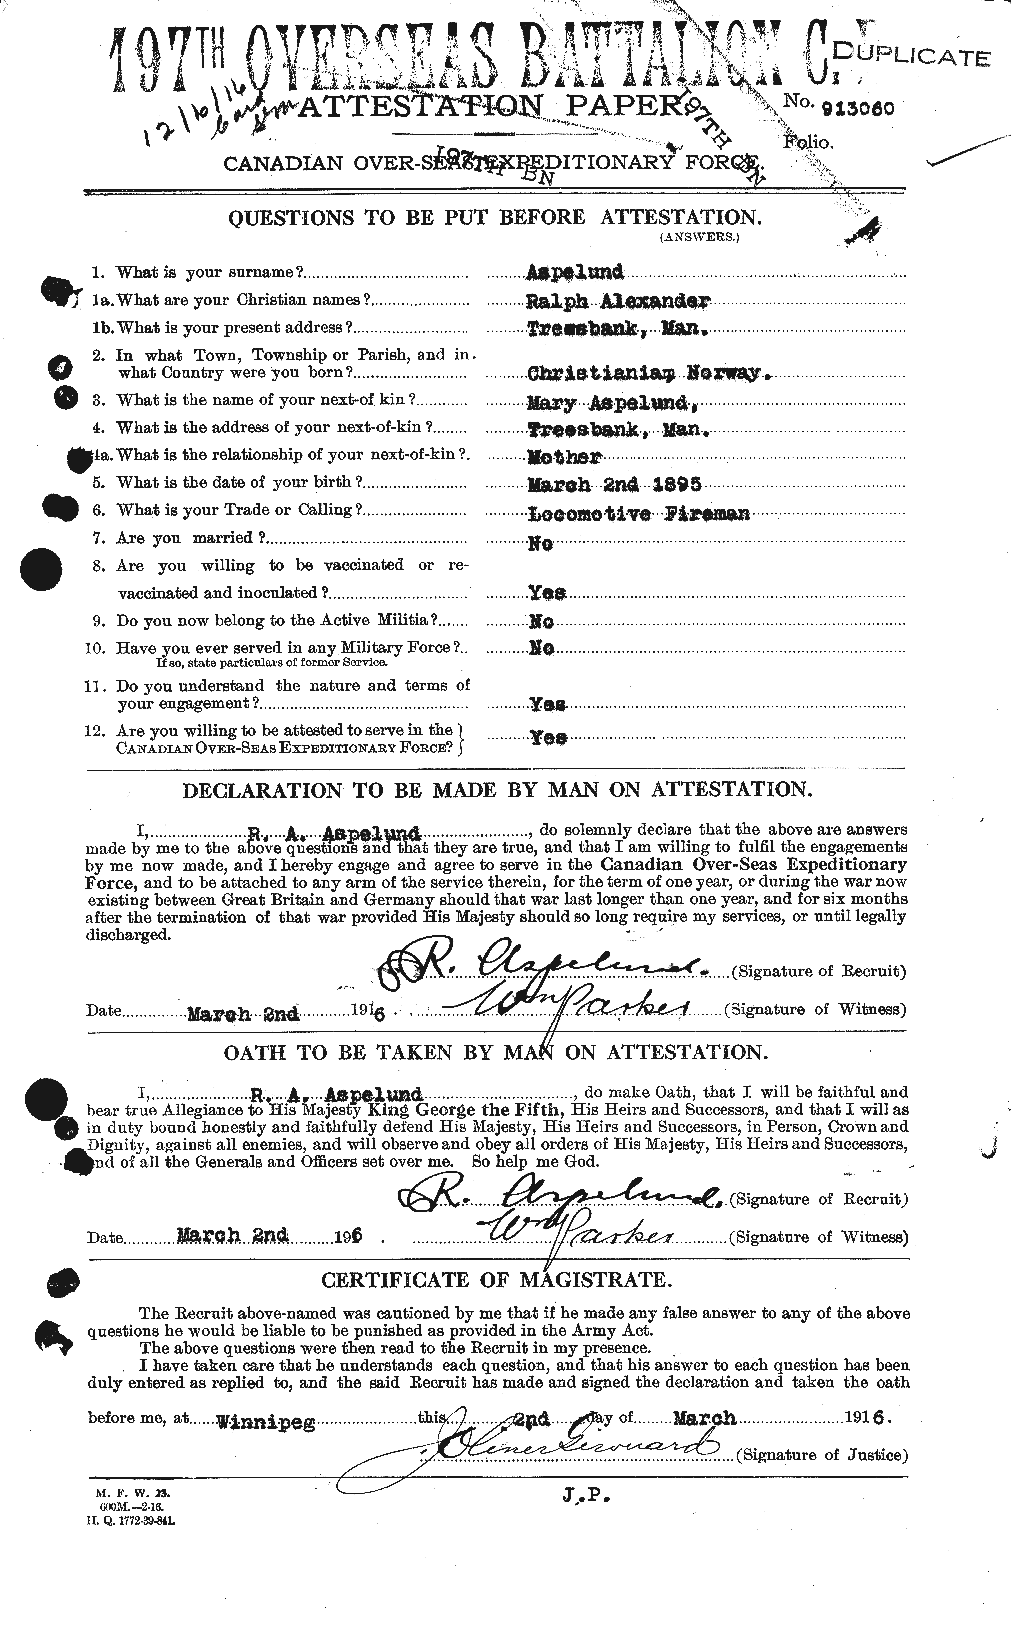 Personnel Records of the First World War - CEF 223594a